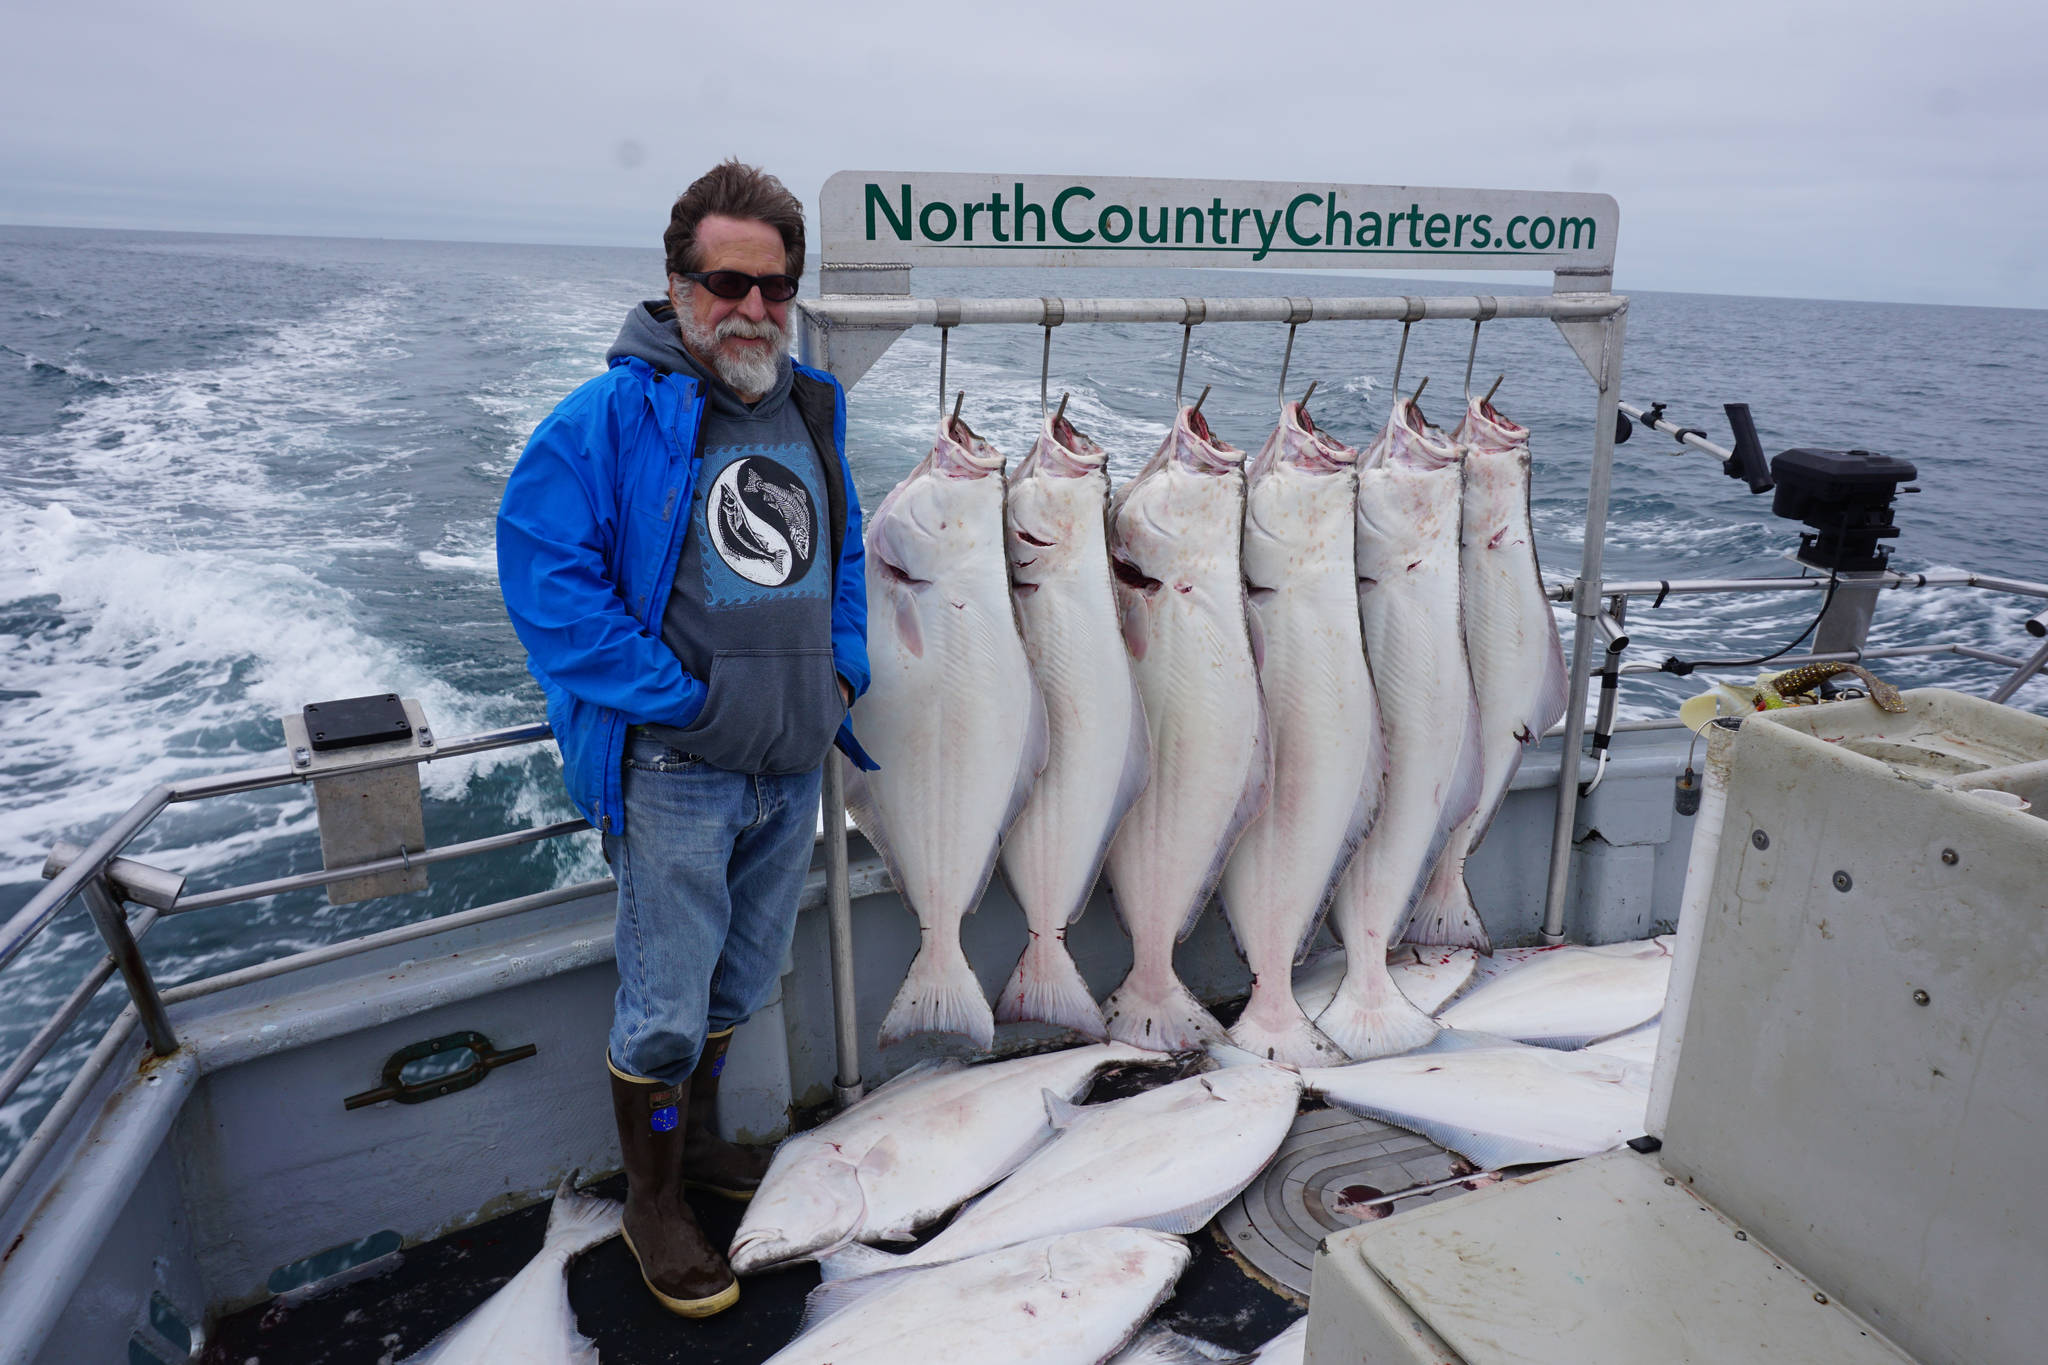 Michael Armstrong stands by a rack of halibut on the Irish as the North Country Charters boat returns to Homer, Alaska. He caught two of the smaller fish on the deck. The 16 fishermen on the 53-foot boat all limited out on a July 16, 2017 guided halibut fishing trip. Photo by Øisten Stokke Berget